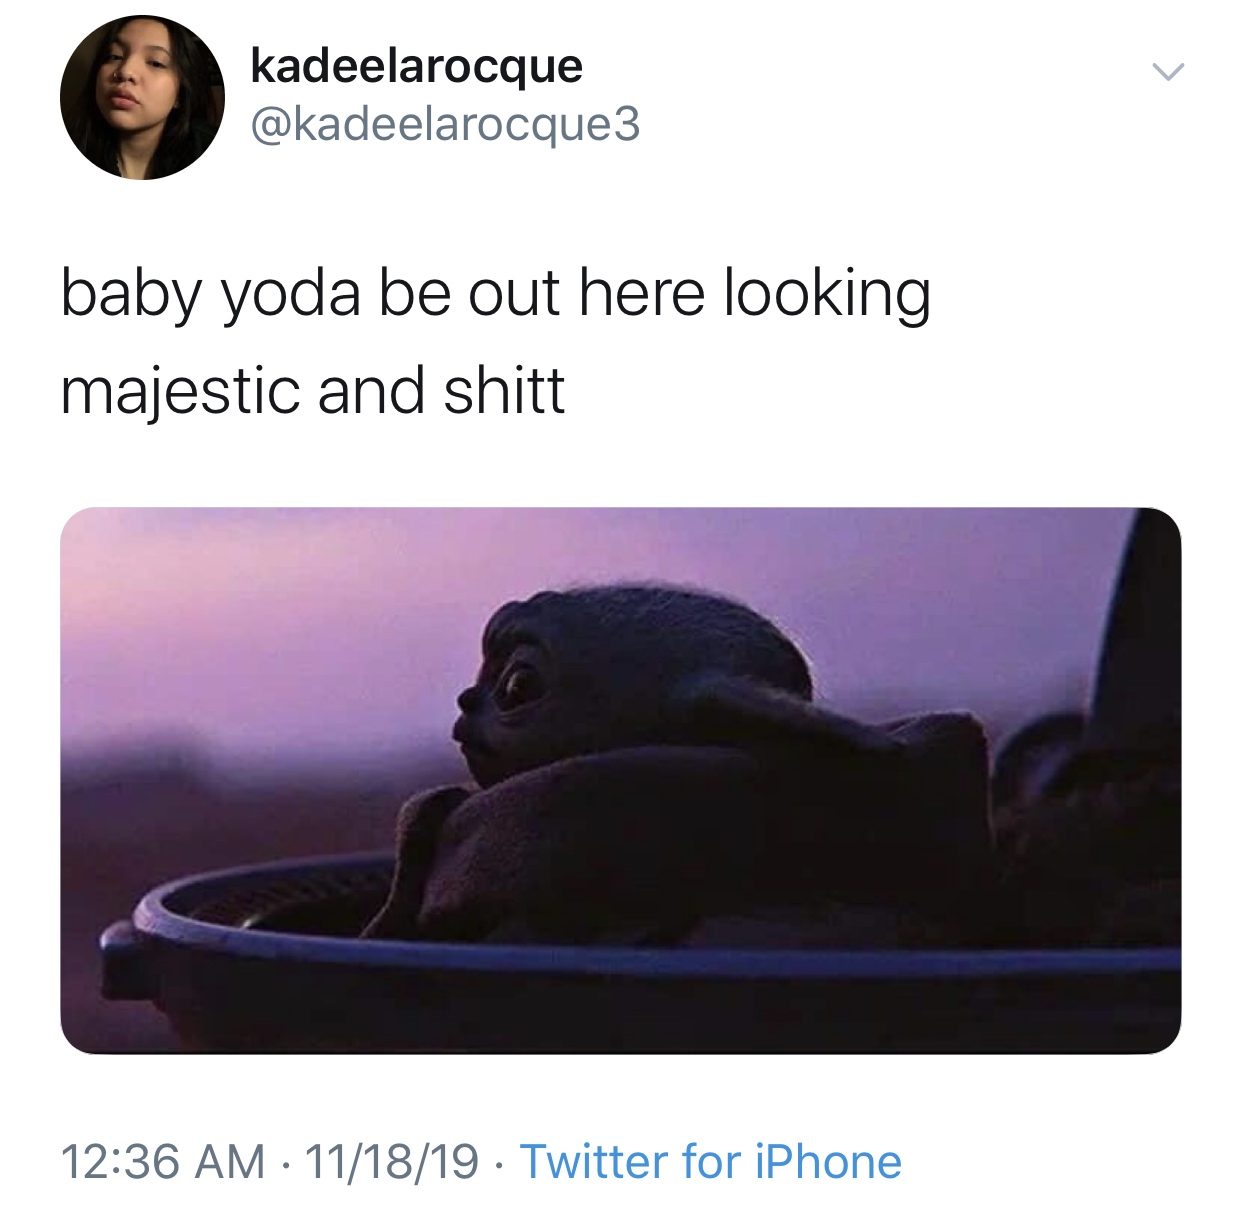 baby yoda meme - kadeelarocque baby yoda be out here looking majestic and shitt 111819 Twitter for iPhone